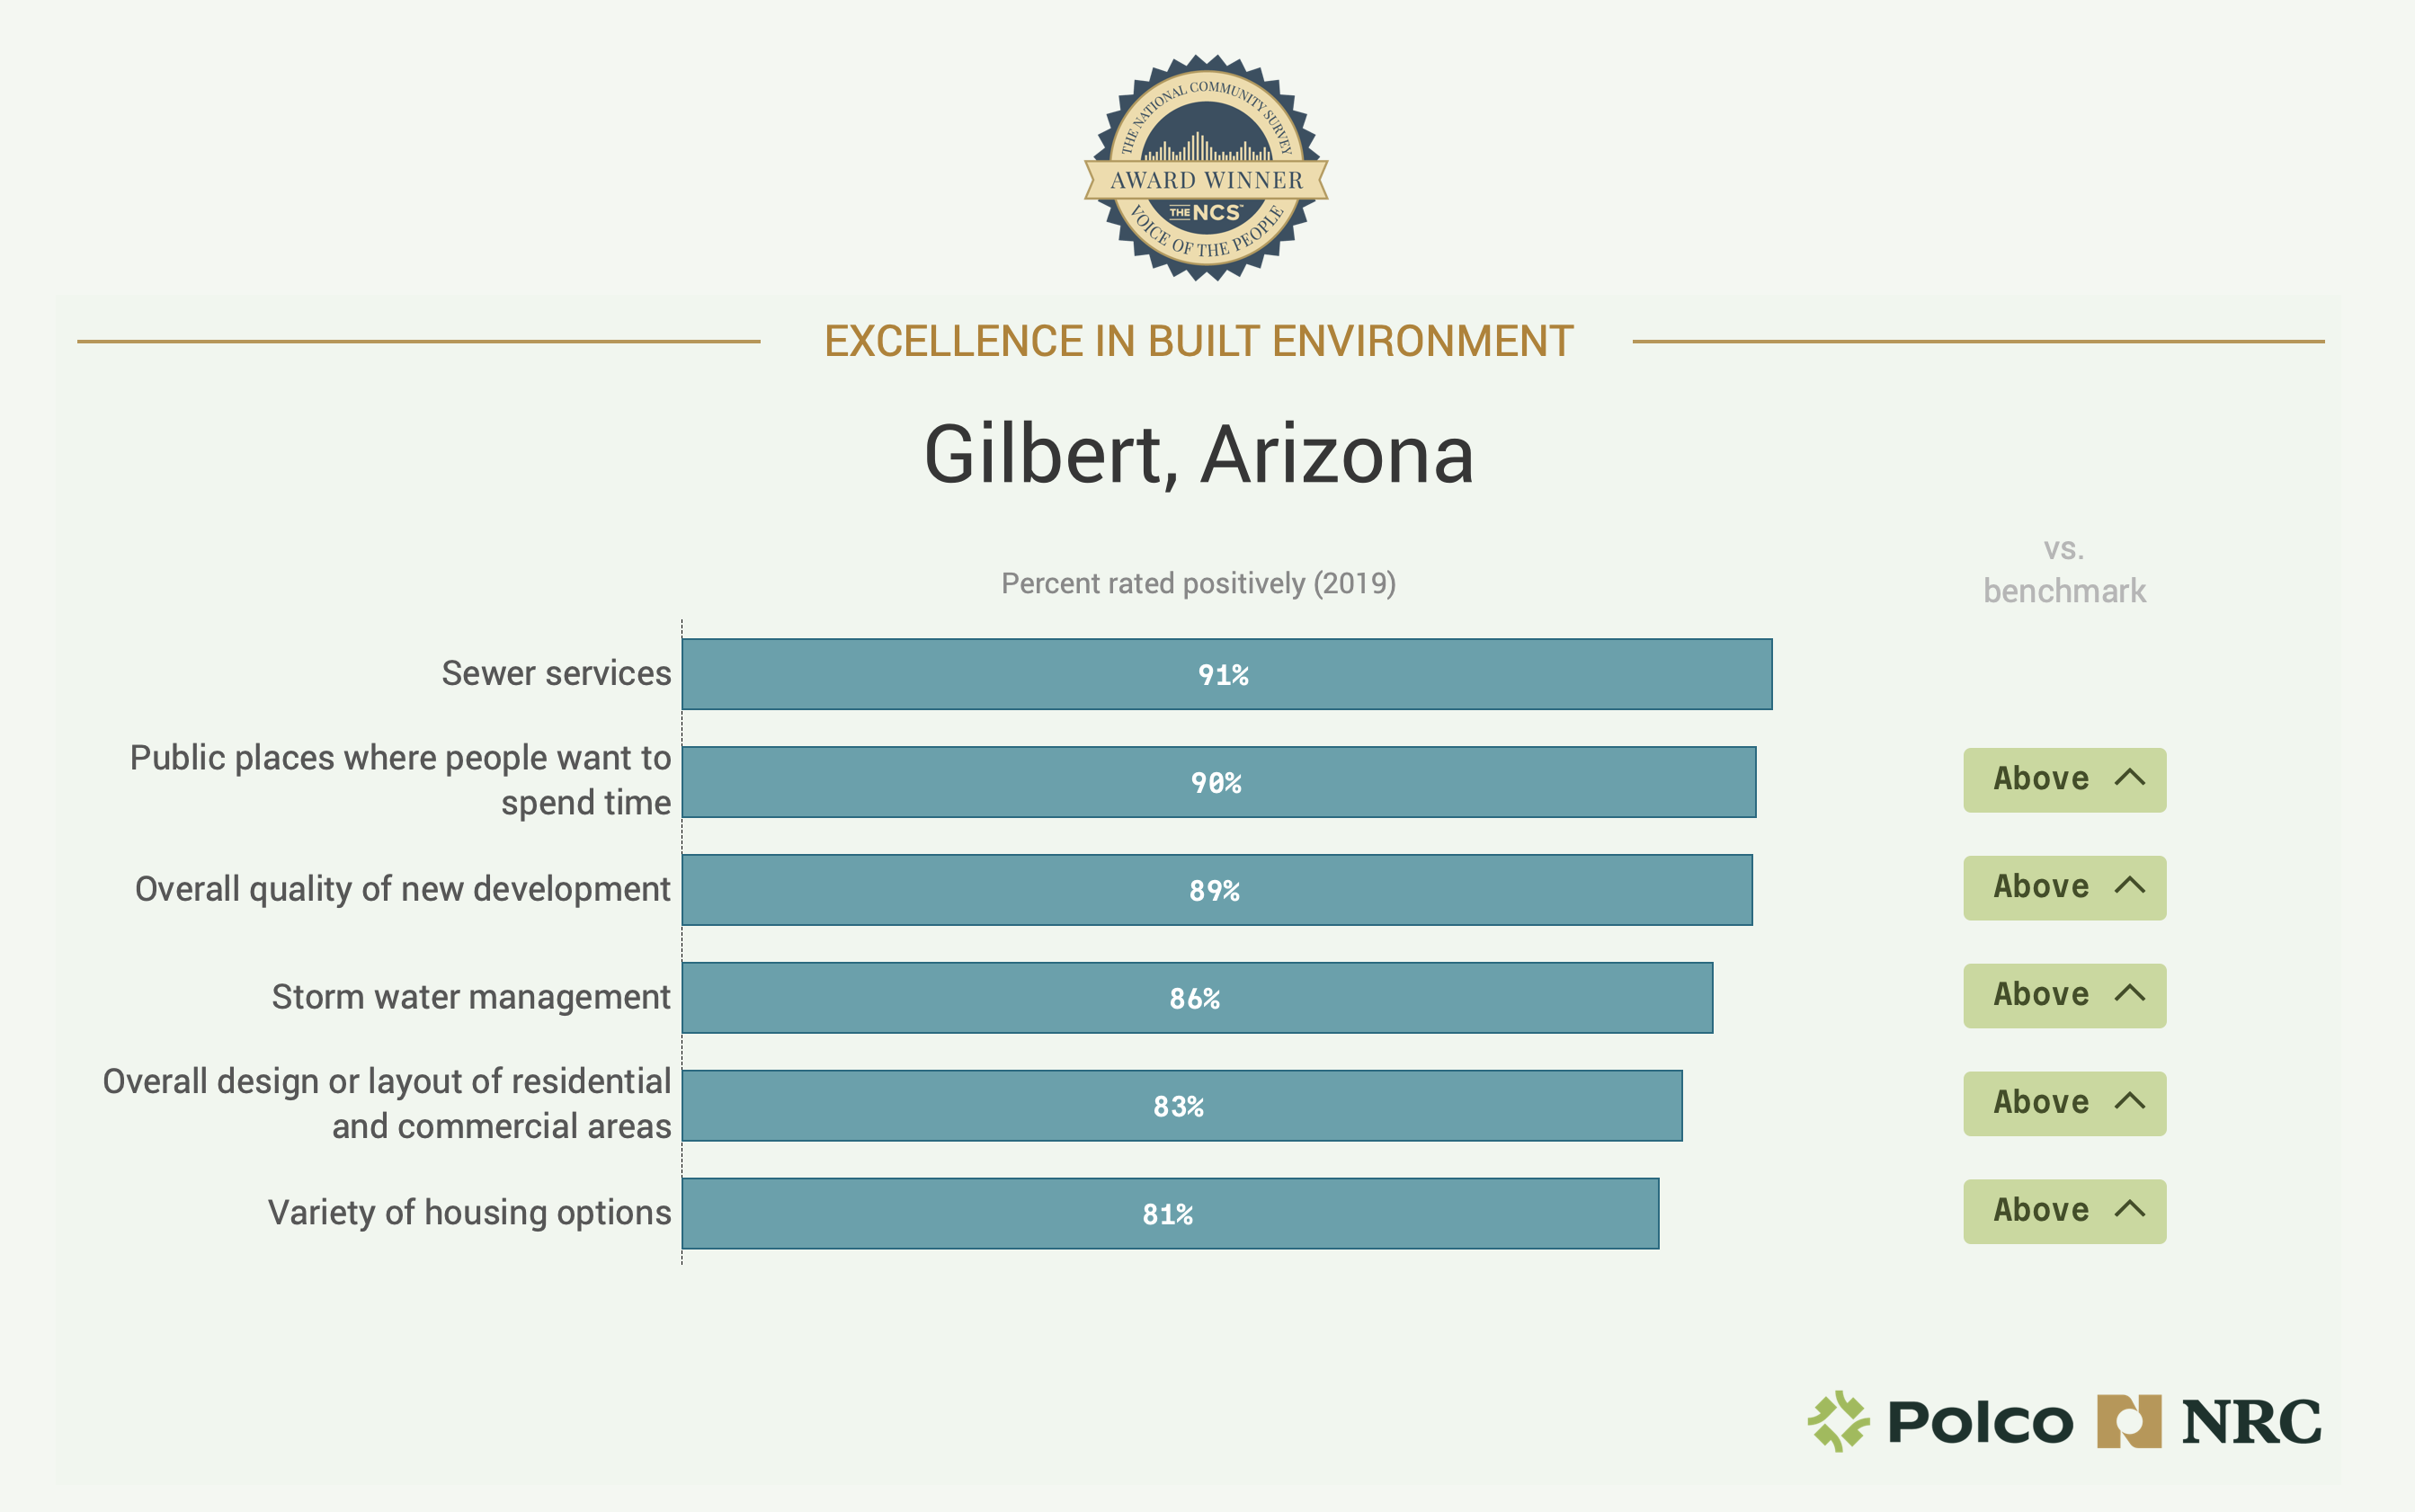 Chart showing Gilbert, Arizona's Excellence in Built Environment 